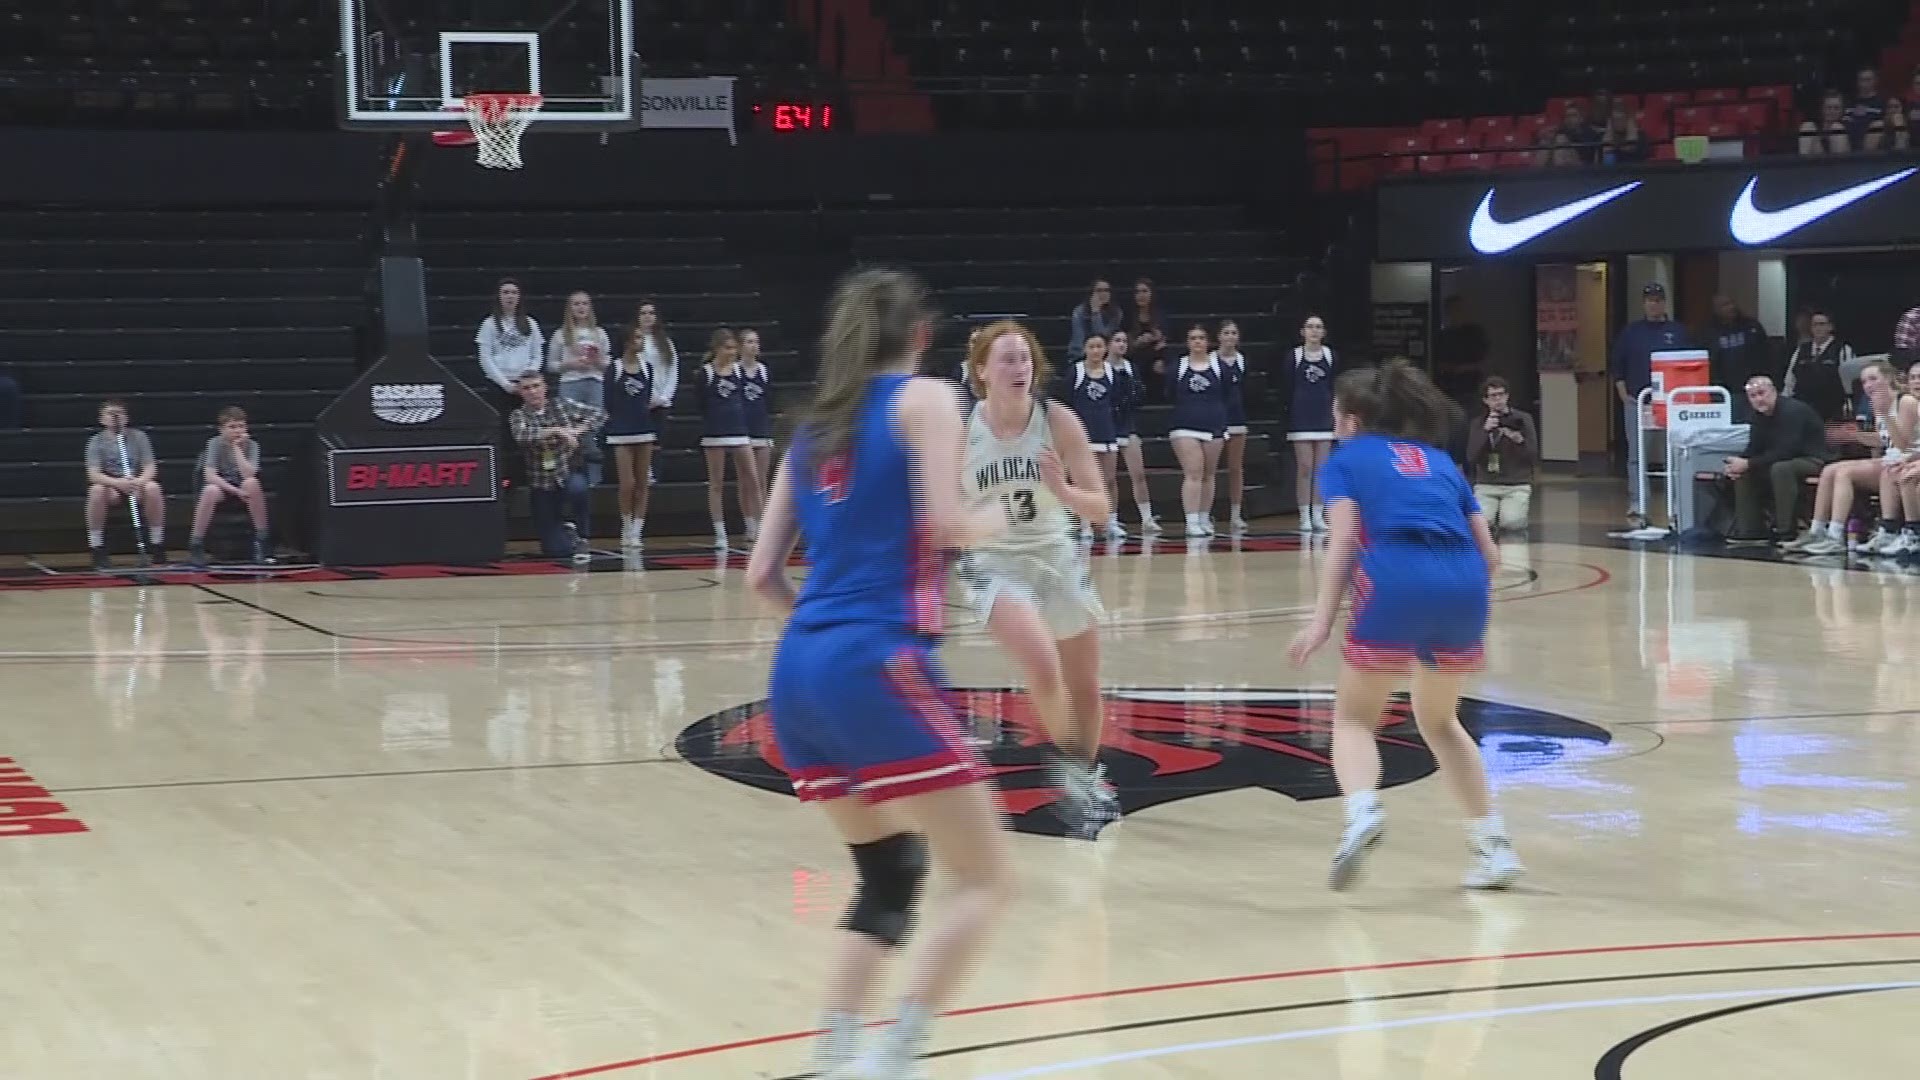 Highlights of No. 3 Wilsonville's 49-29 win over No. 6 Lebanon in the 5A state quarterfinals. Highlights are part of KGW's Friday Night Hoops with Orlando Sanchez.